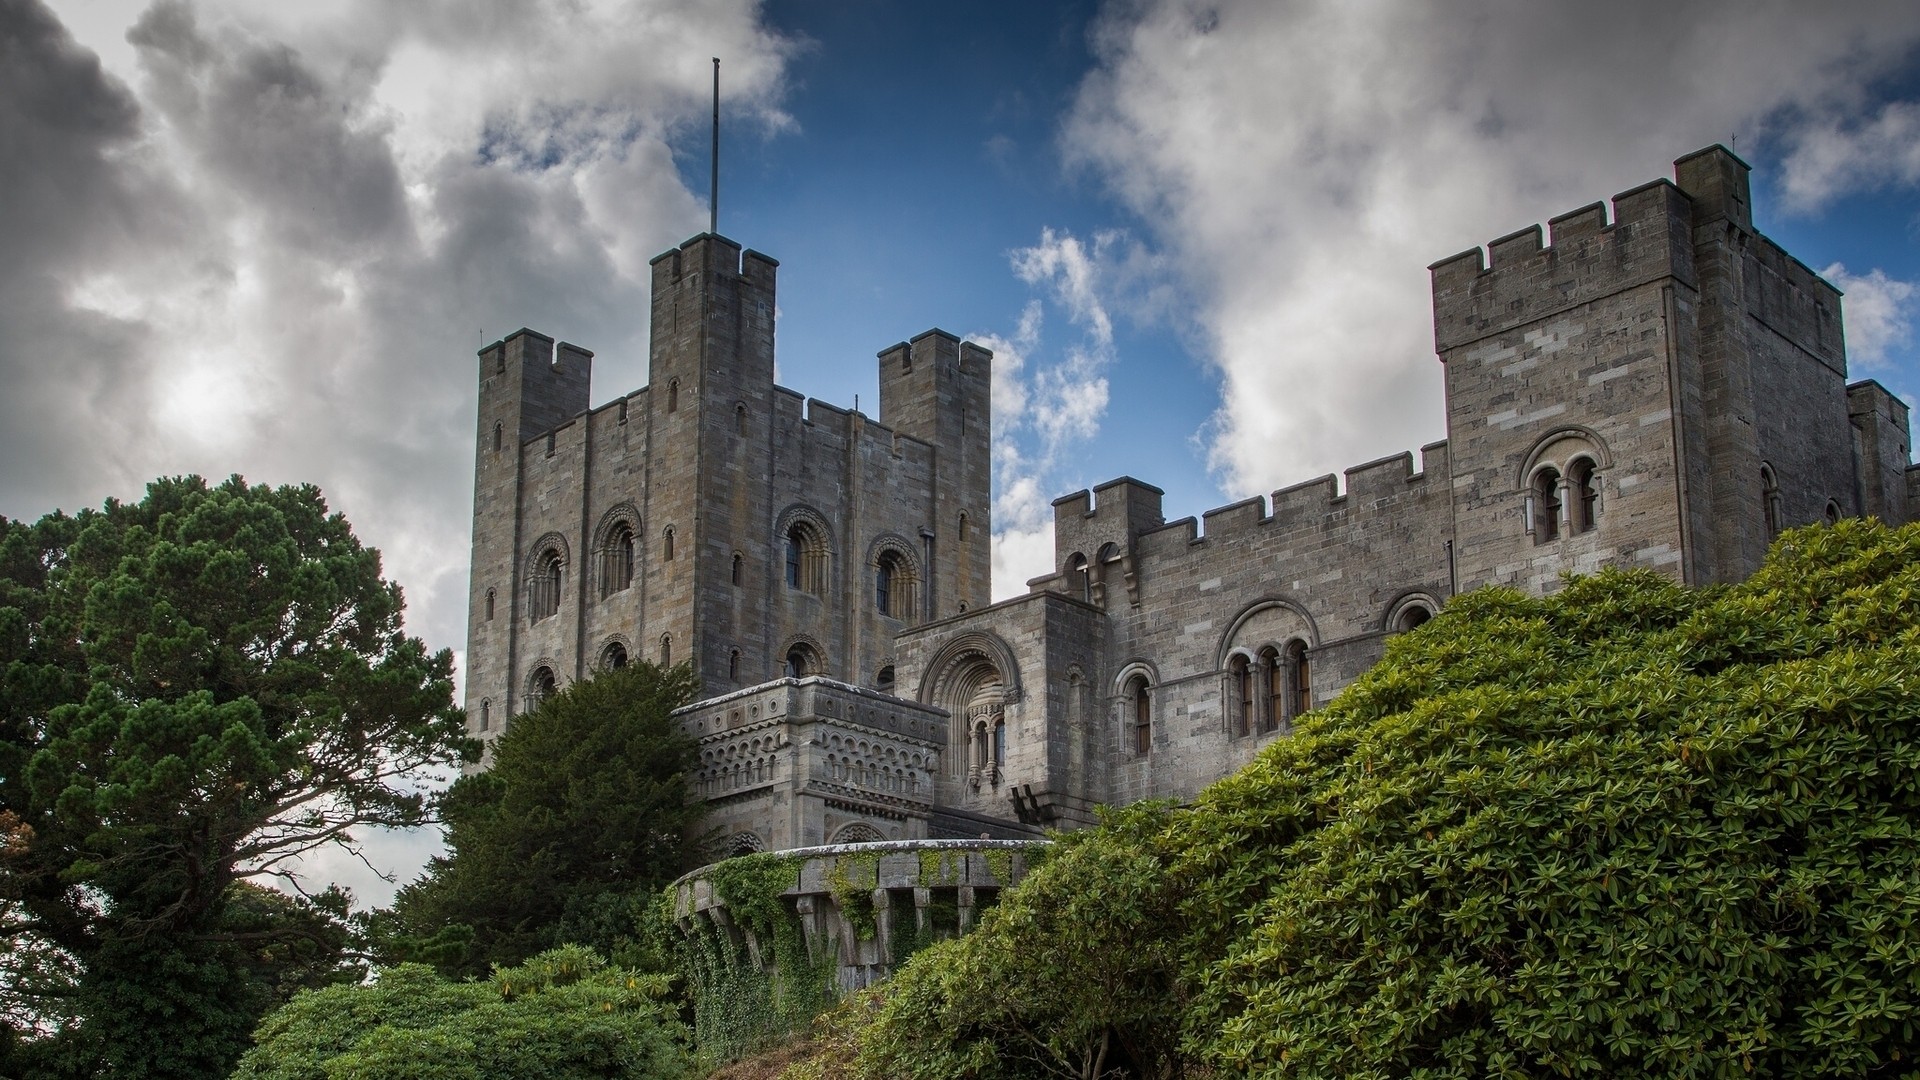 General 1920x1080 architecture castle tower trees Wales UK clouds arch